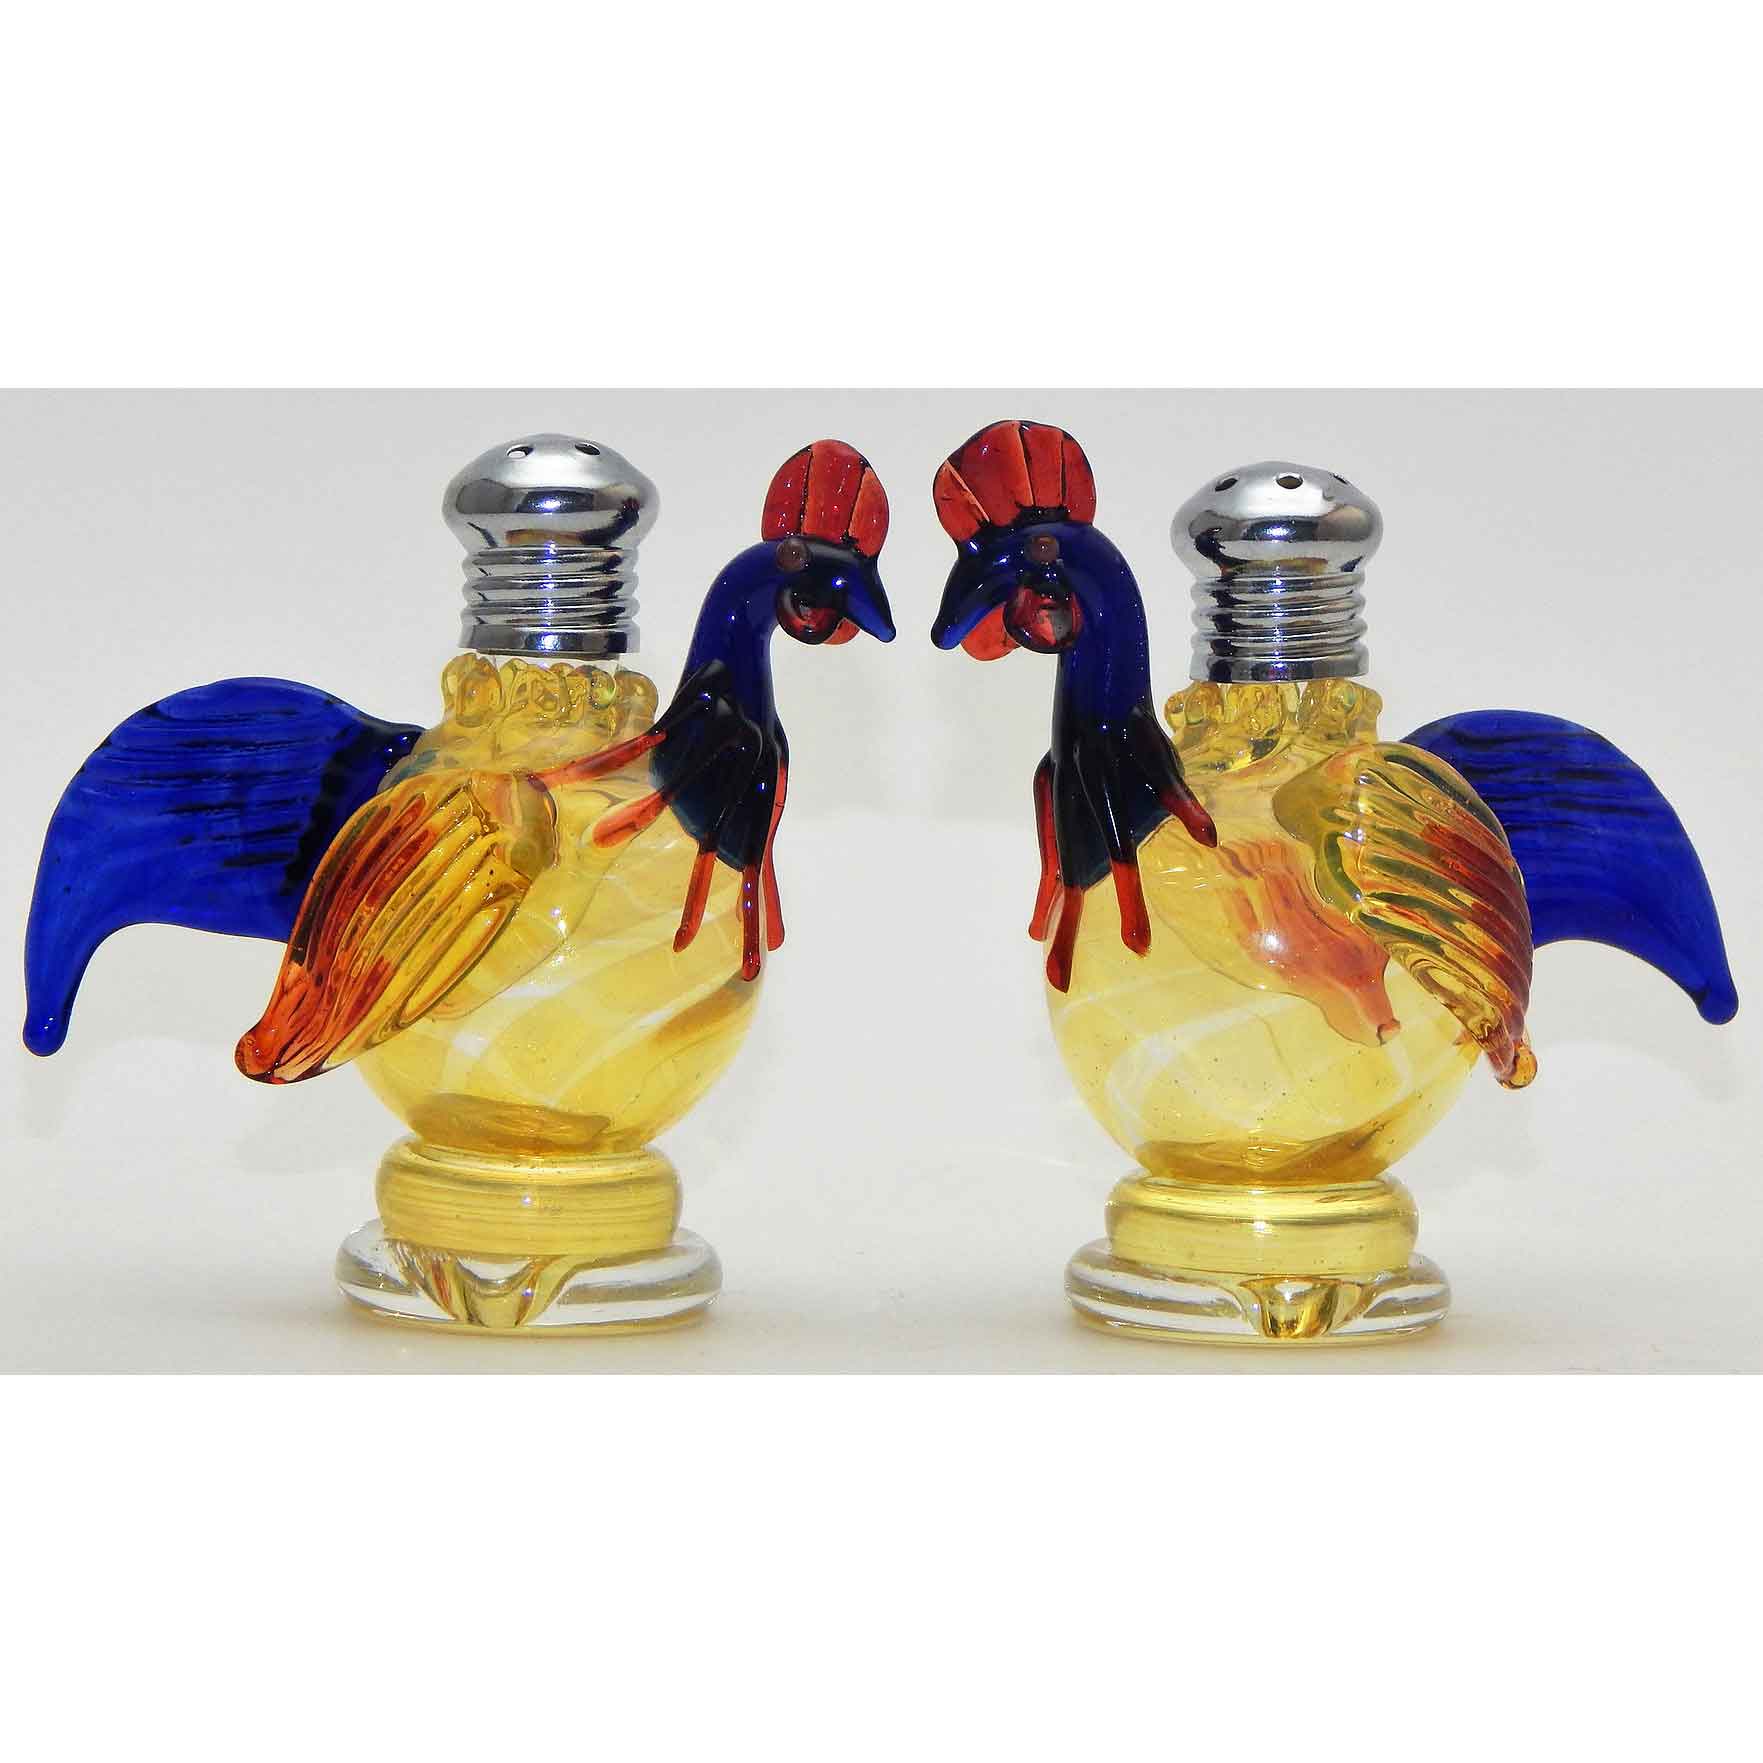 Roosters Blown Glass Salt and Pepper Shaker 252 by Four Sisters Art Glass